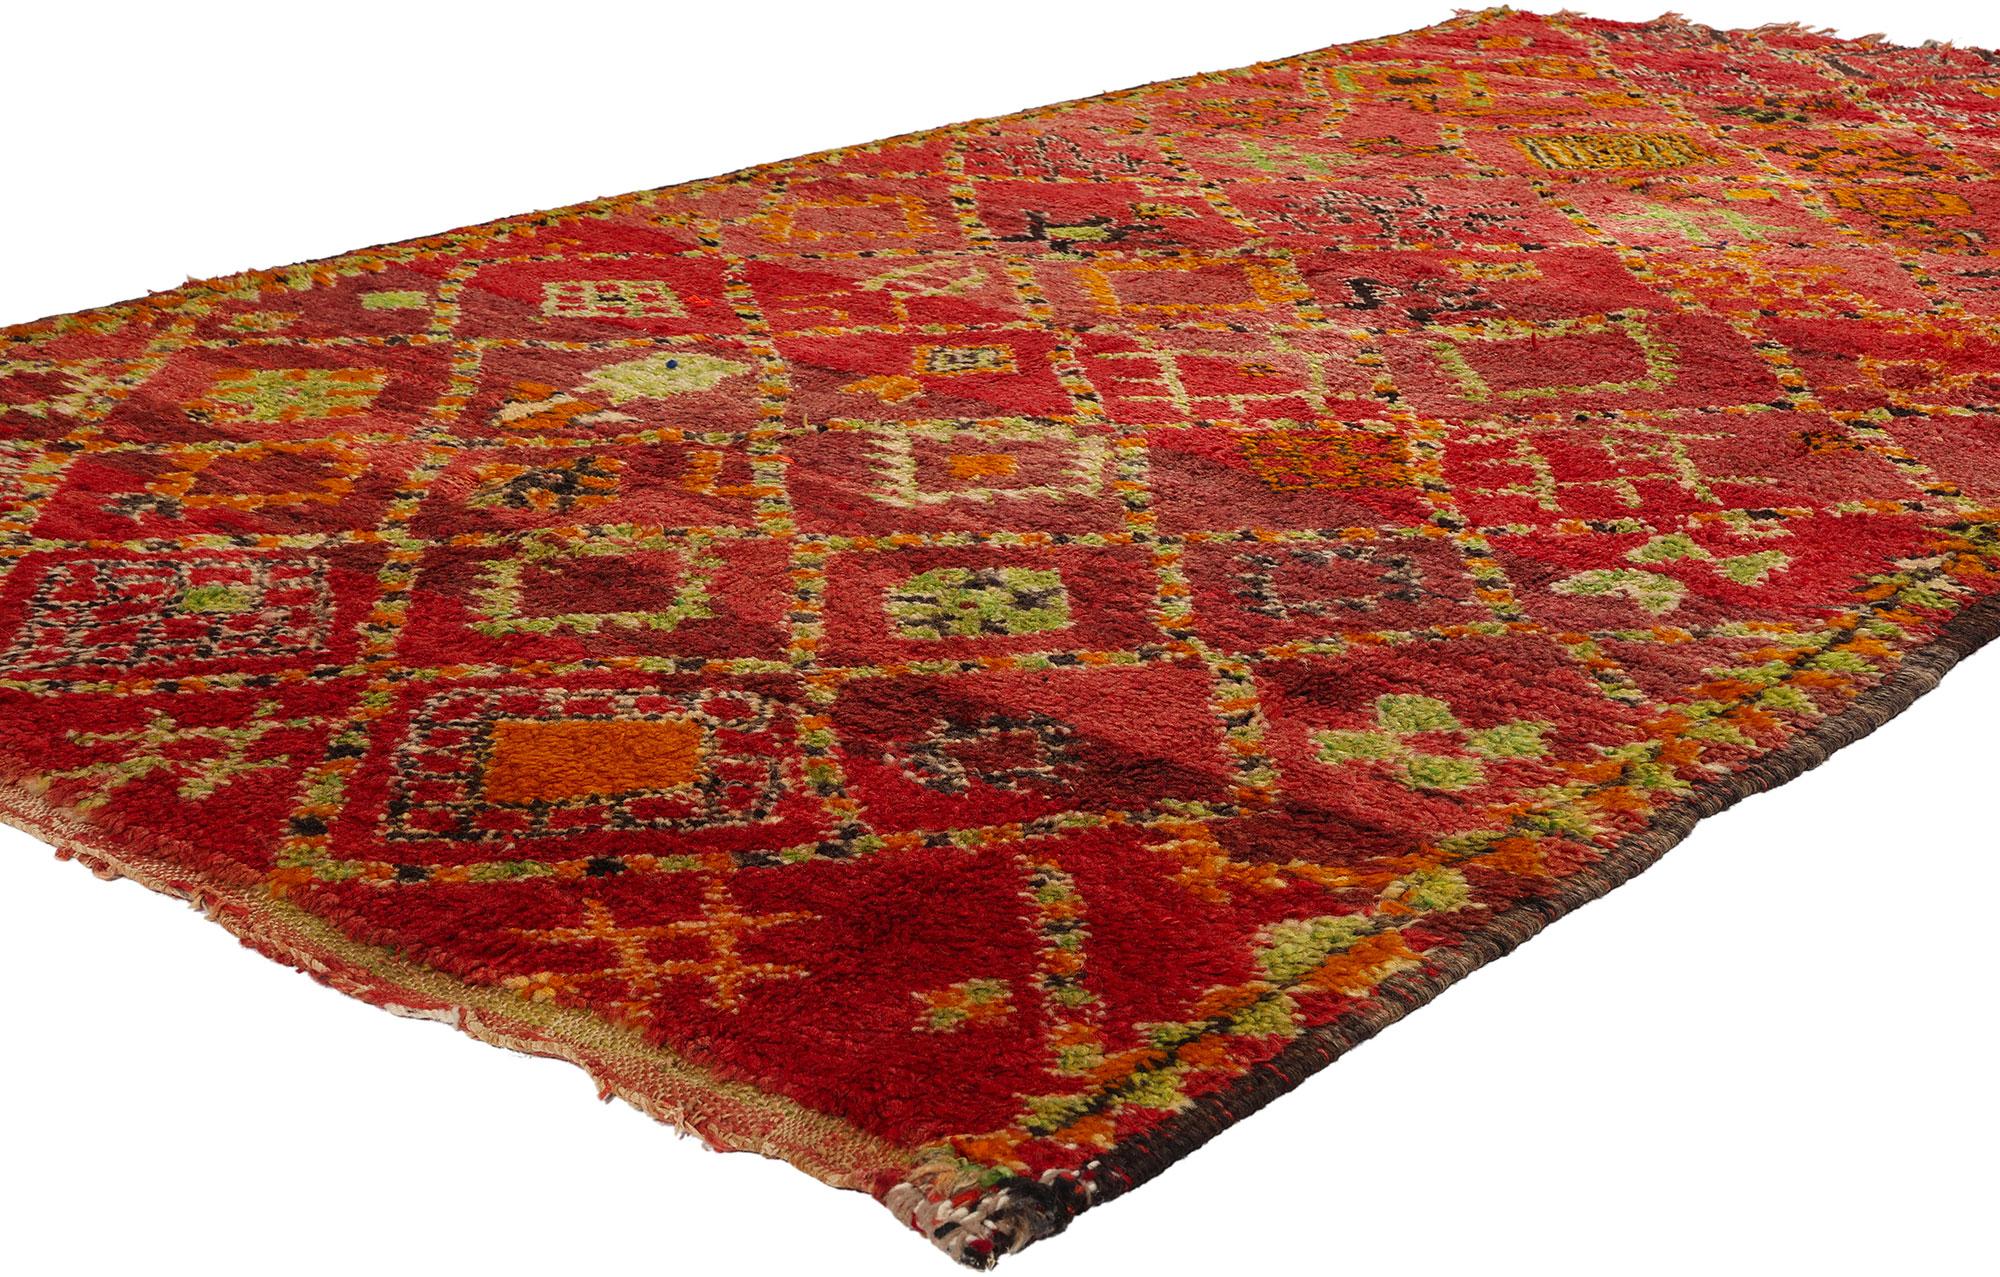 21746 Vintage Red Beni MGuild Moroccan Rug, 05'02 x 09'05. Nestled in Morocco's Middle Atlas Mountains, Beni M'Guild rugs epitomize a cherished Berber tradition, meticulously crafted by skilled women using centuries-old techniques. Renowned for